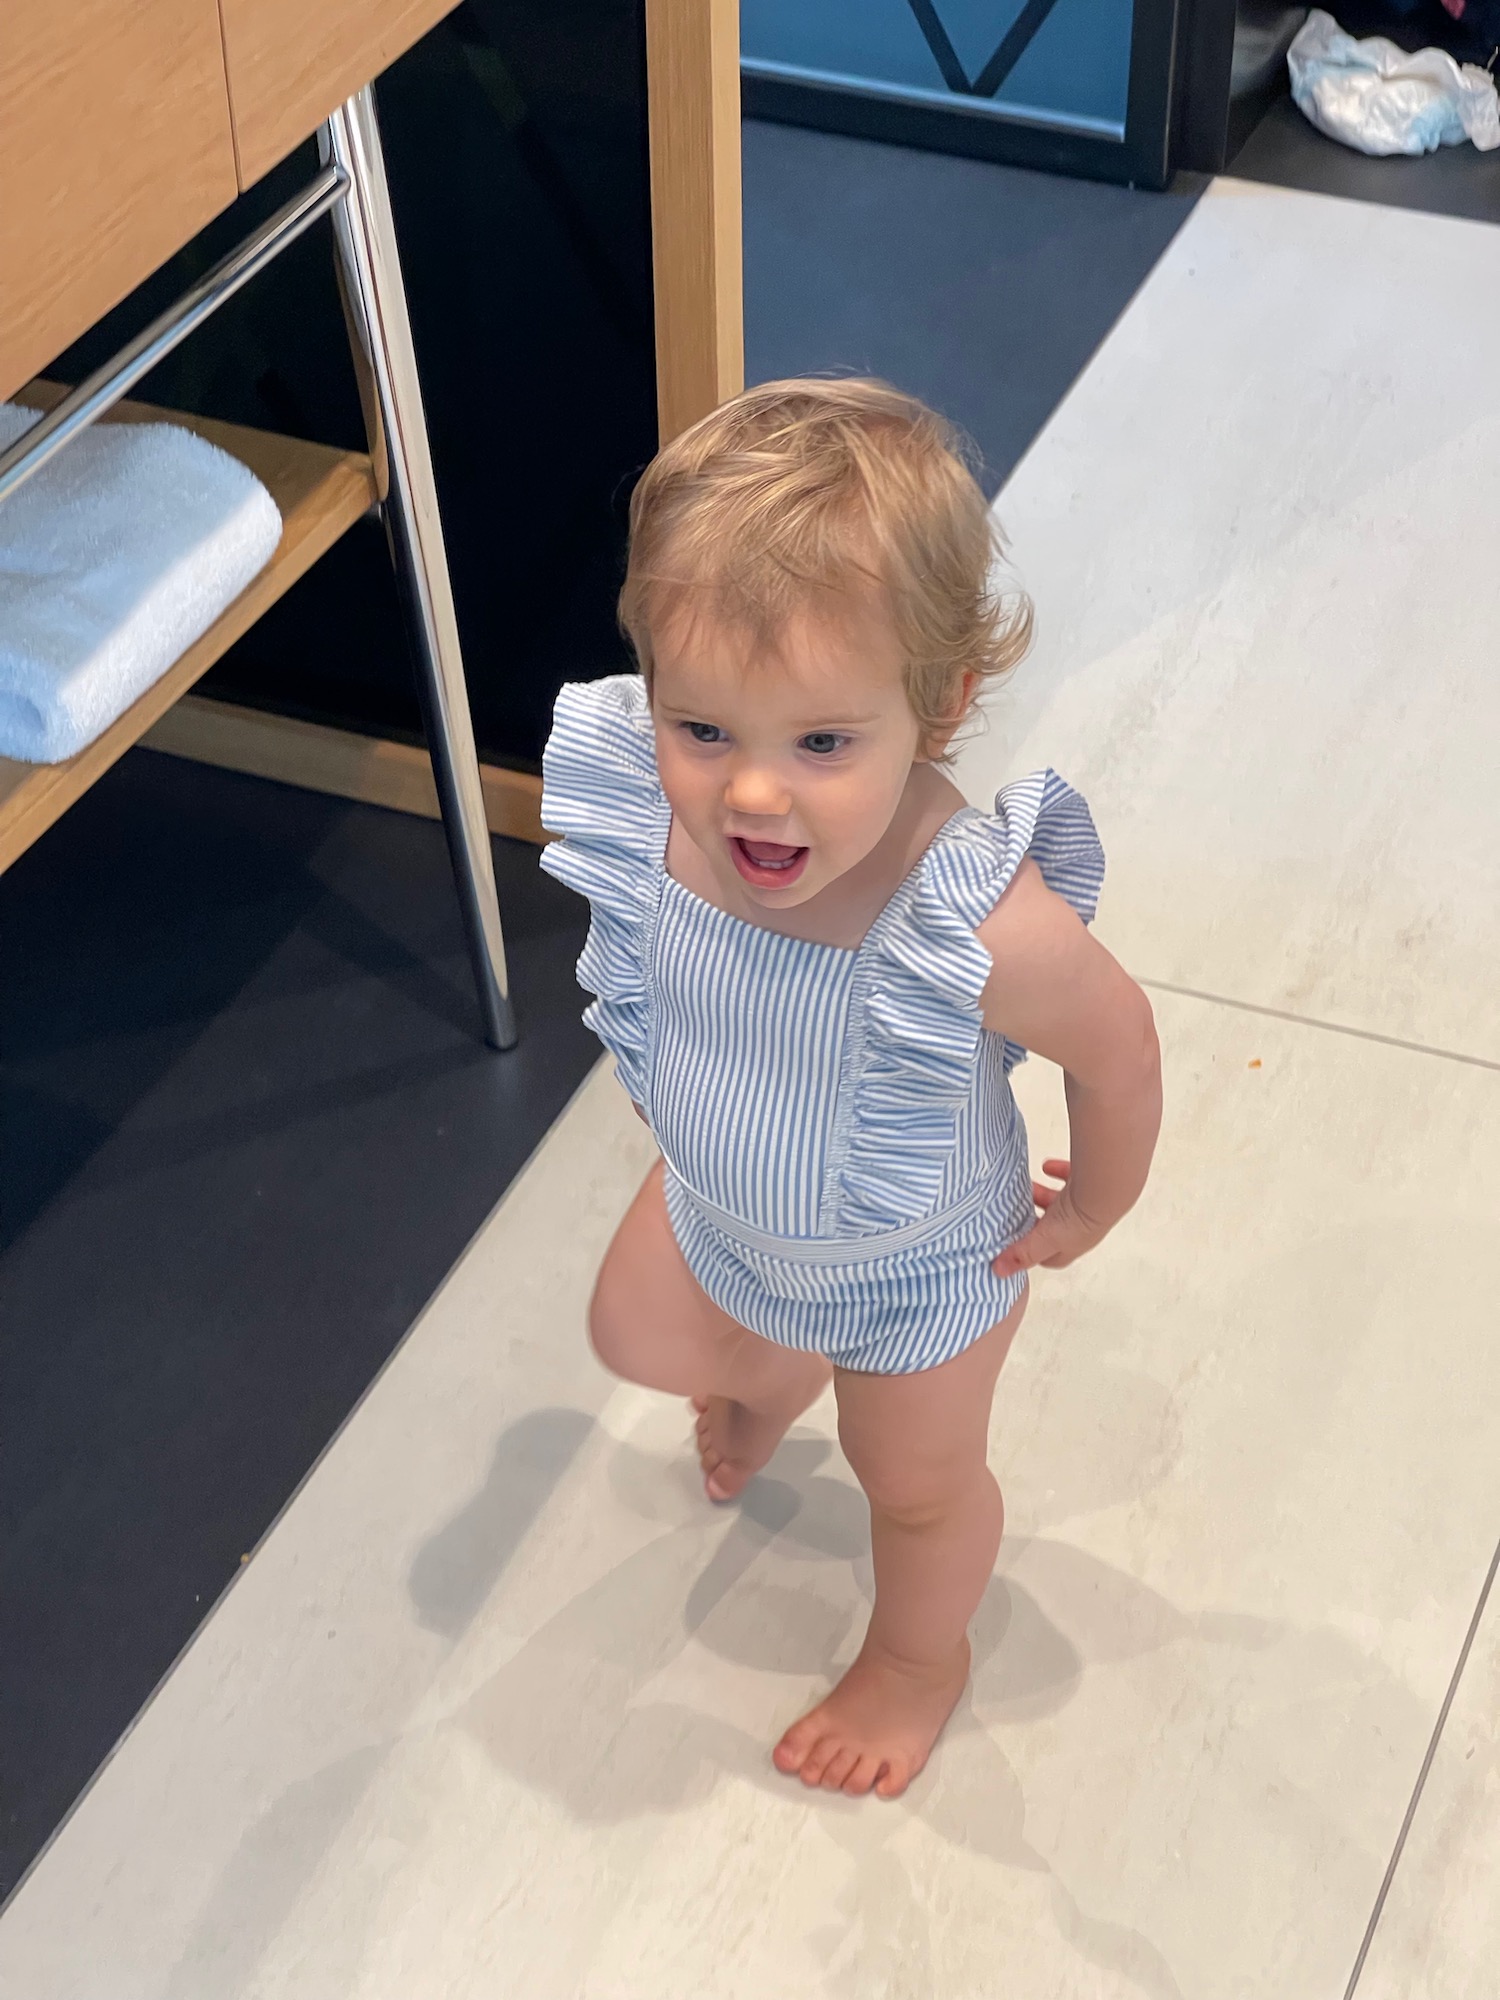 a baby girl standing on a tile floor